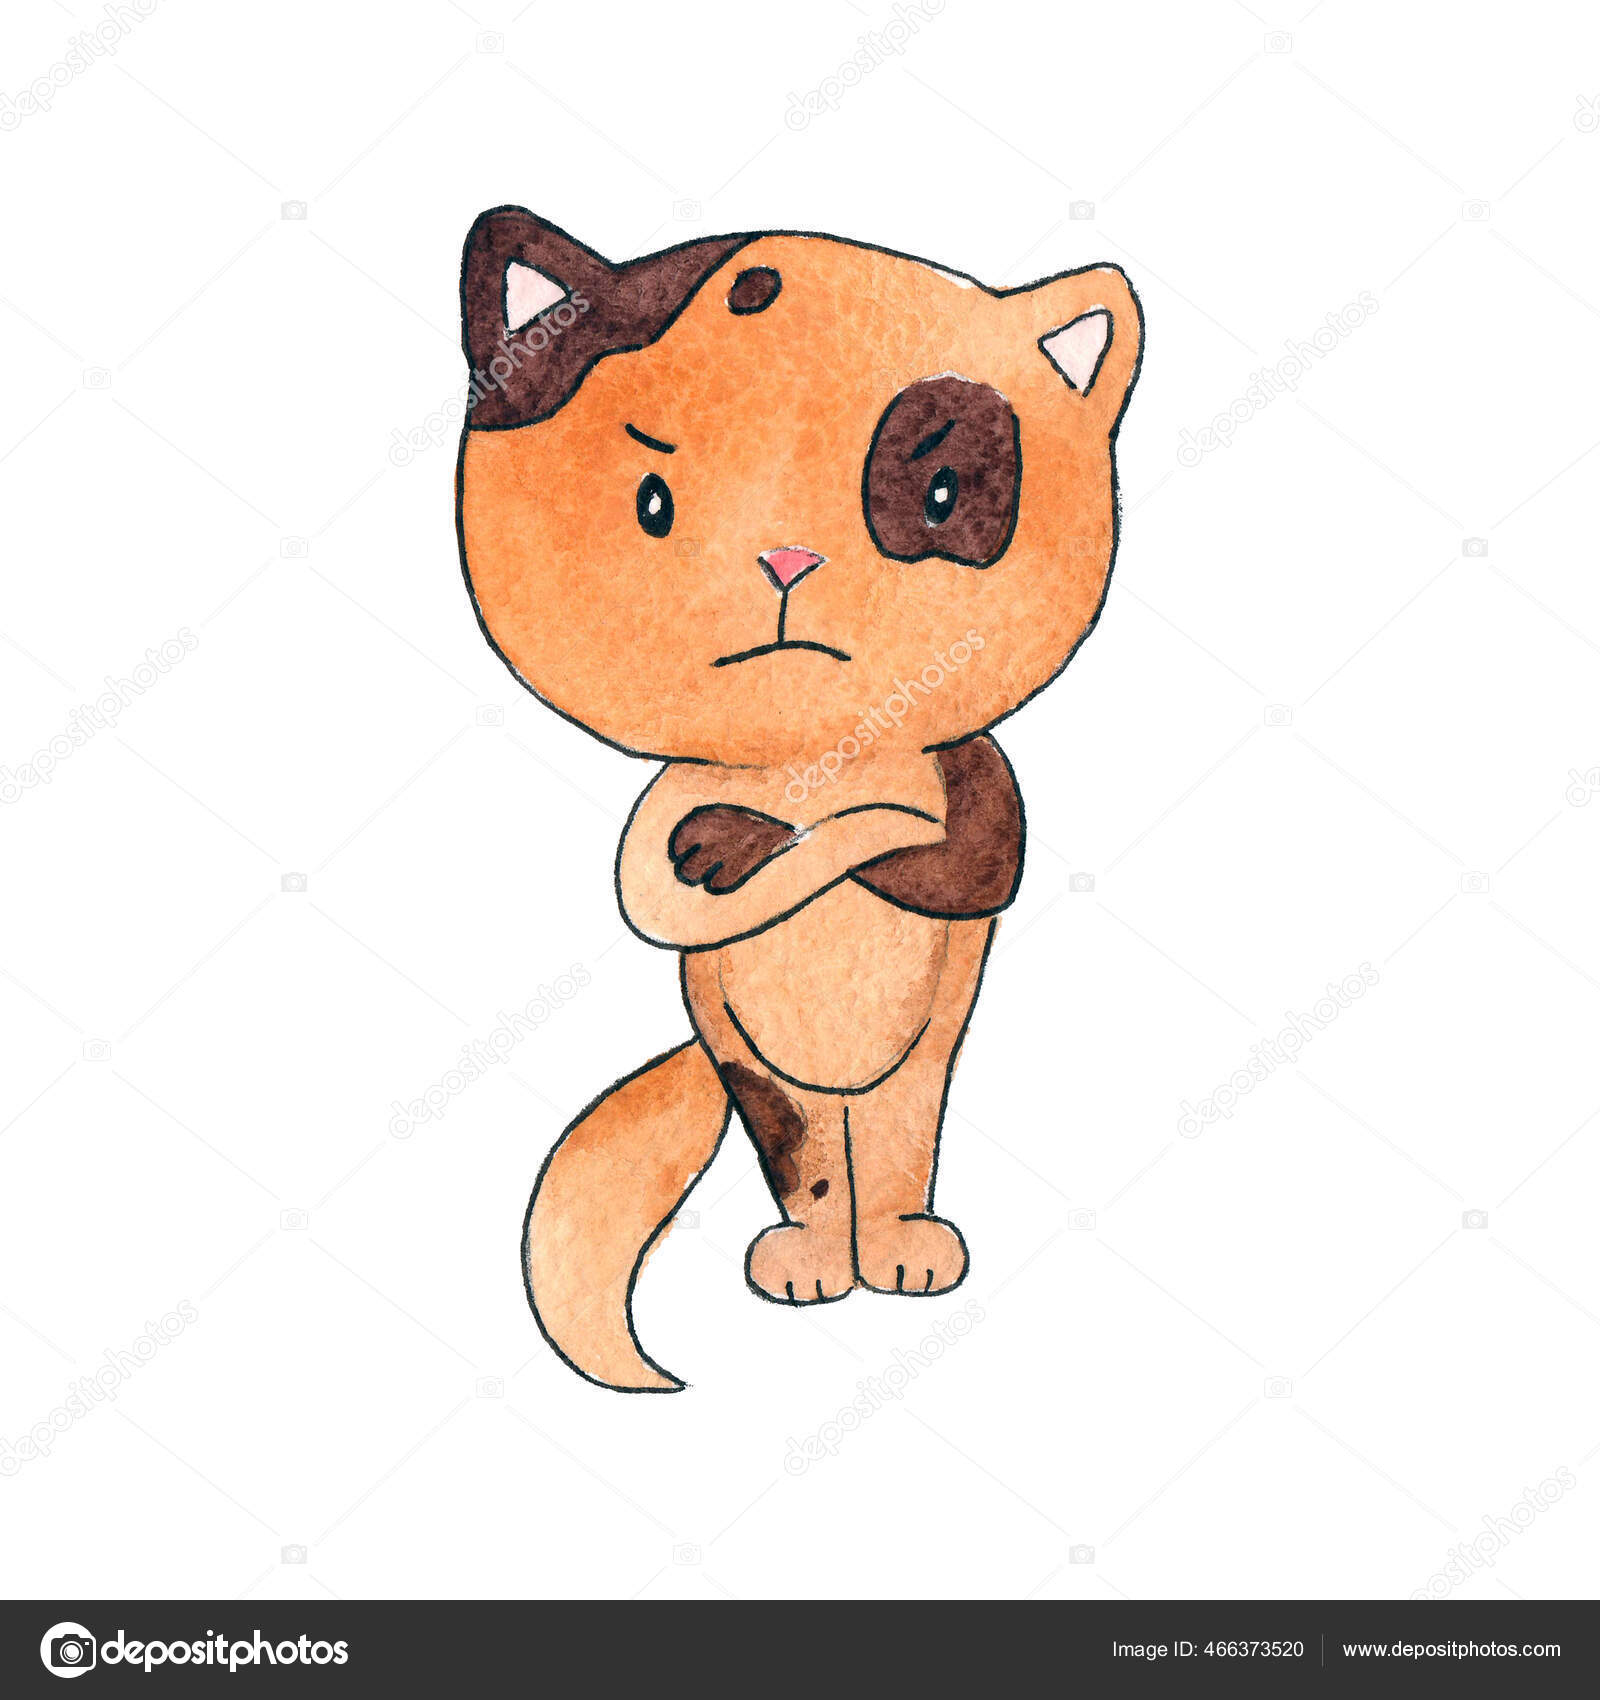 Watercolor illustration of an angry ginger cat. A kitten with